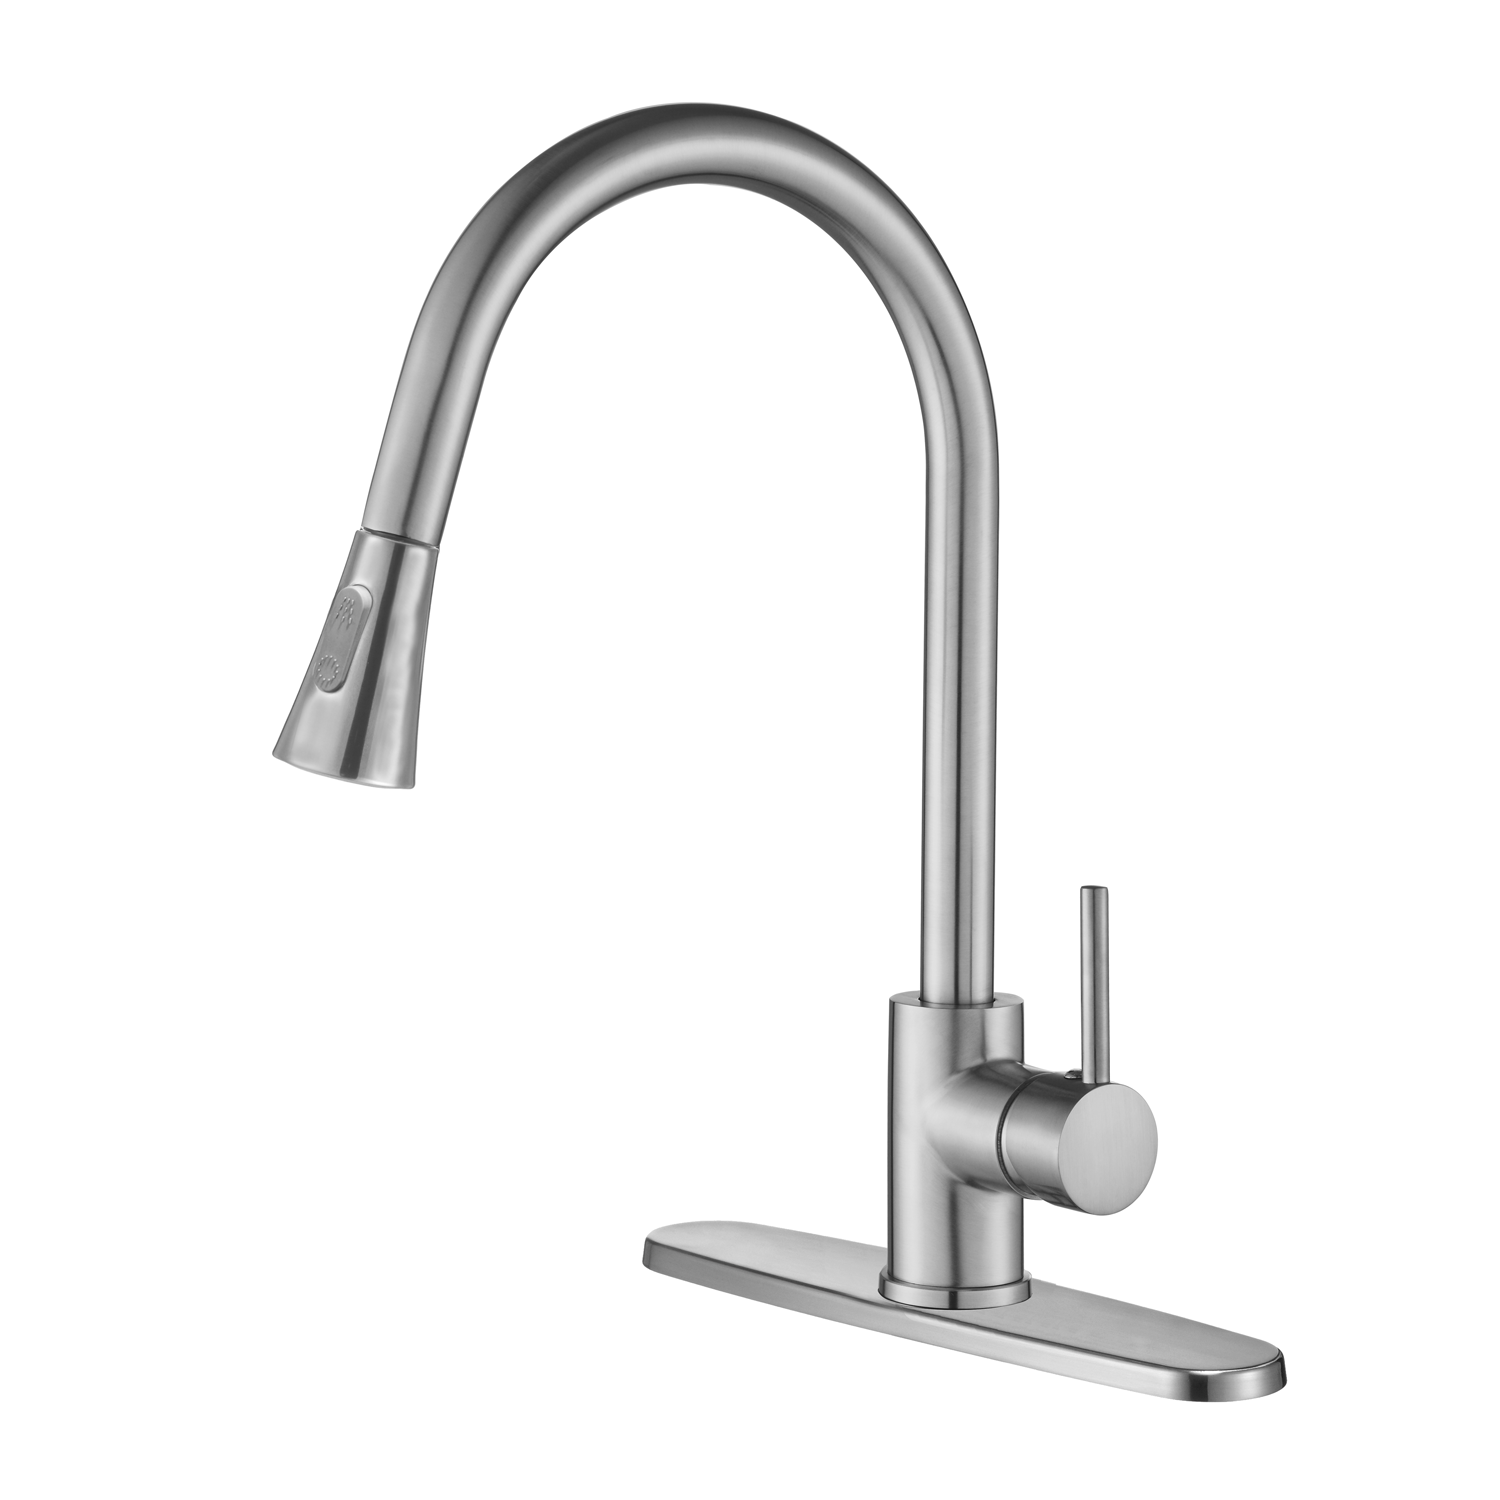 DAX Stainless Steel Kitchen Sink Combo